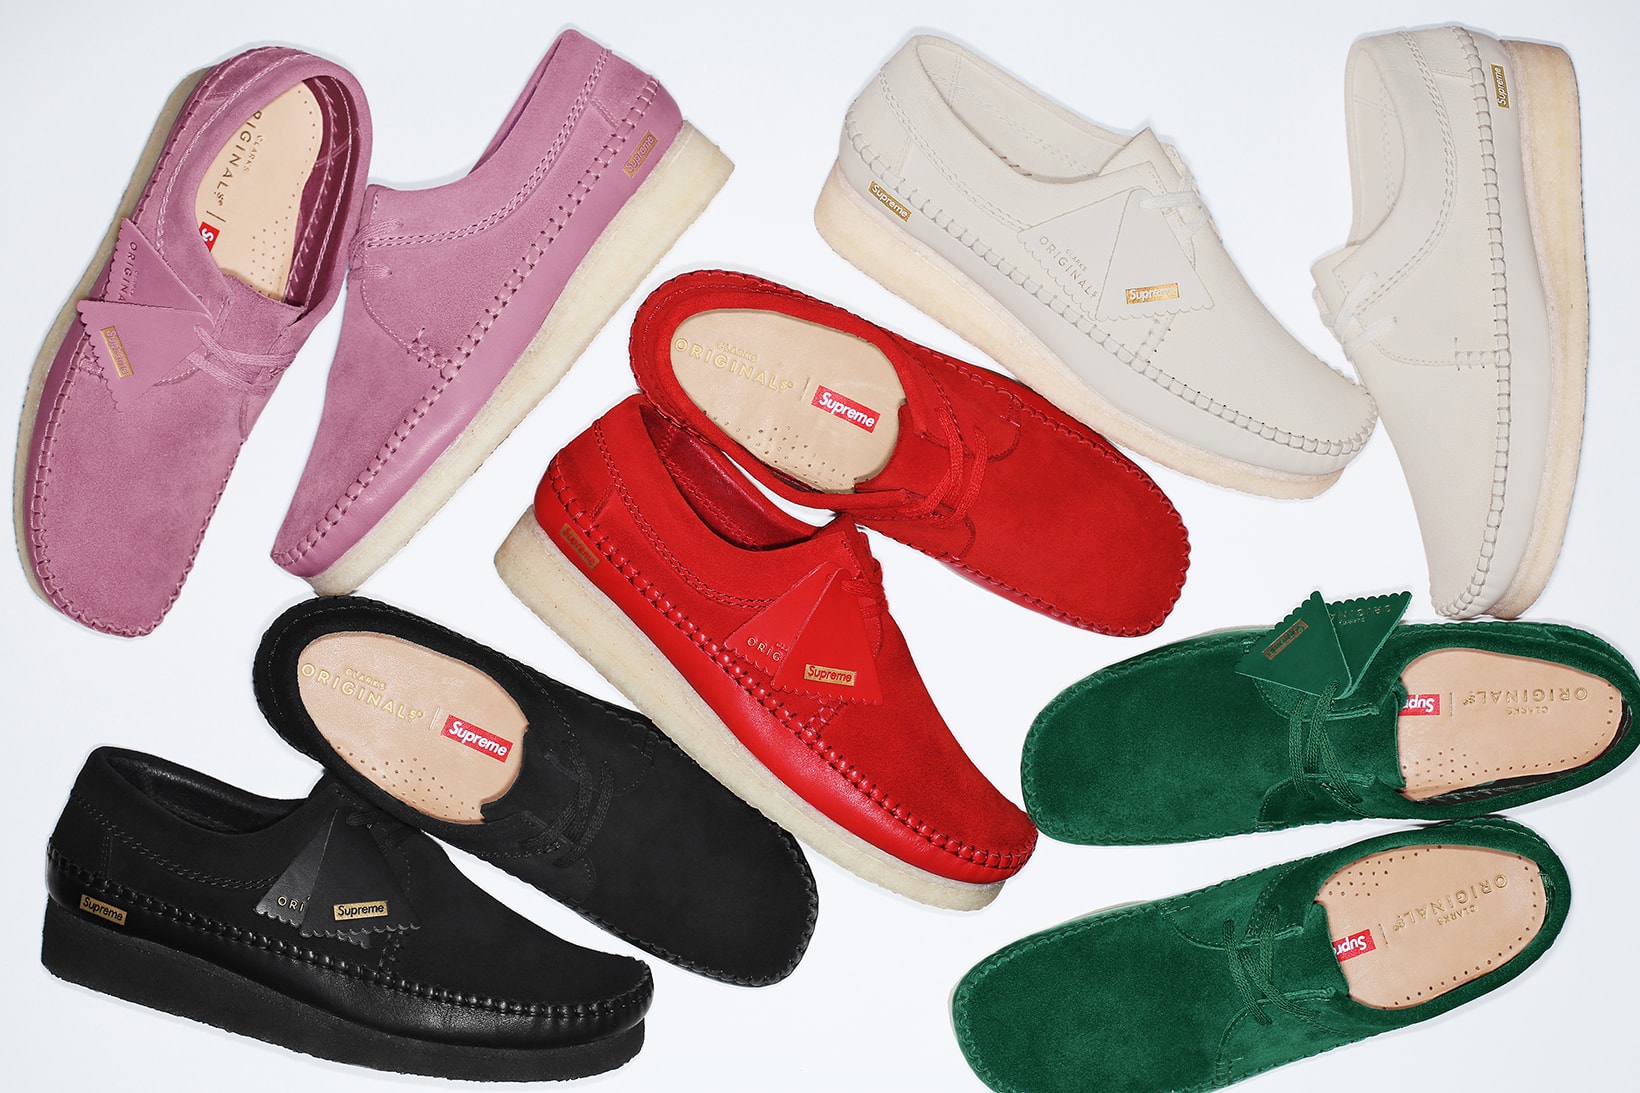 Supreme Clarks Originals Weaver Shoe Red Pink Green Black White Spring Summer 2018 Collaboration Collection Release Date Info